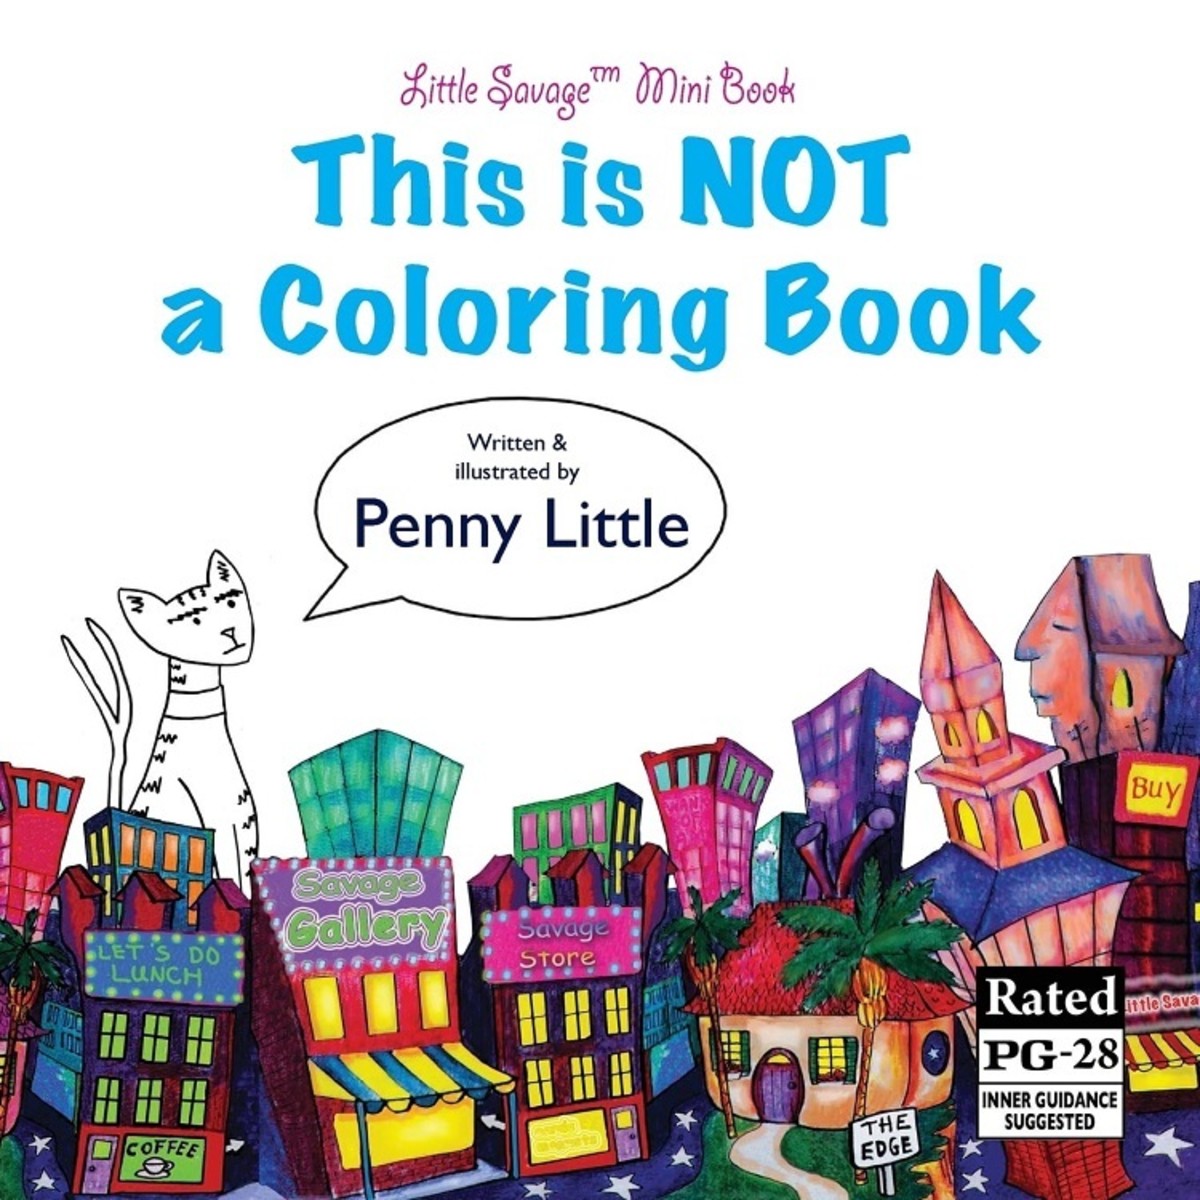 Between the Bookends: ‘This is NOT a Coloring Book’